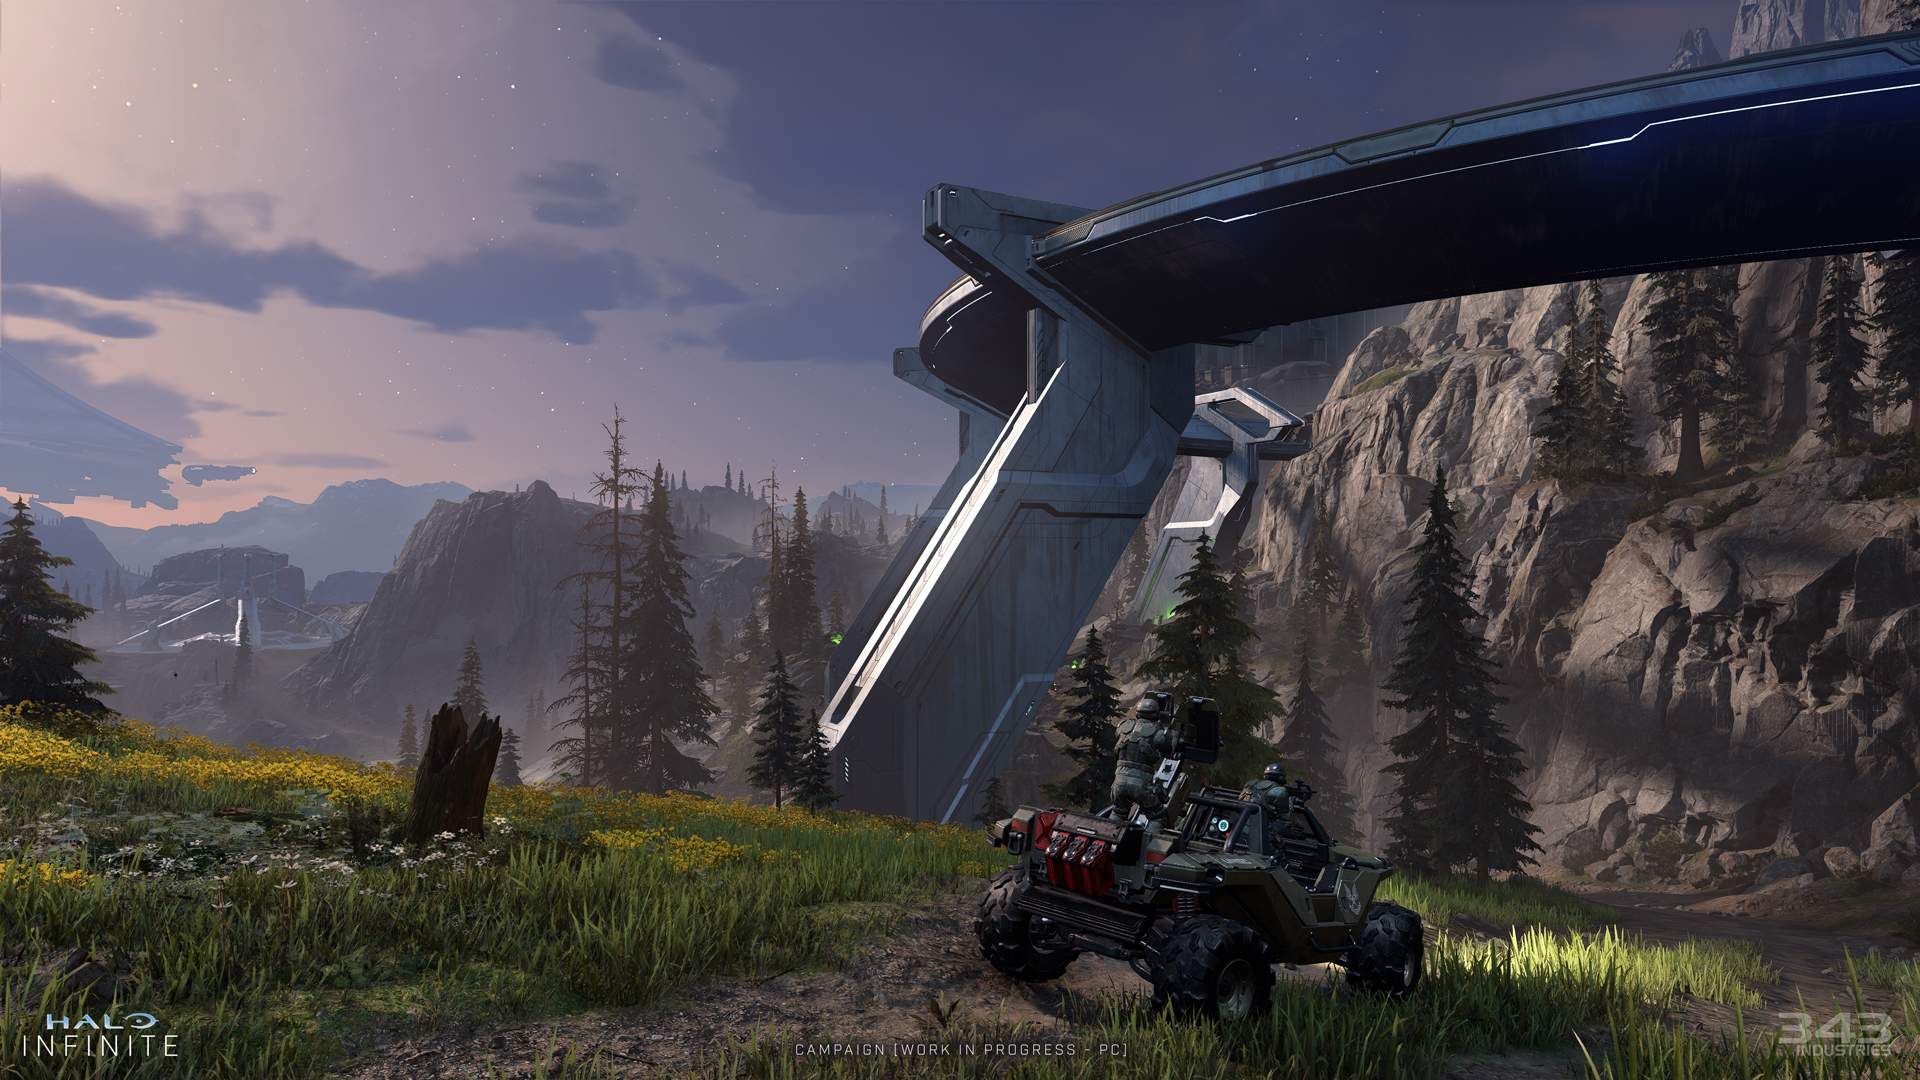 Video game screenshot of futuristic soldiers riding a jeep across a forested world at dusk